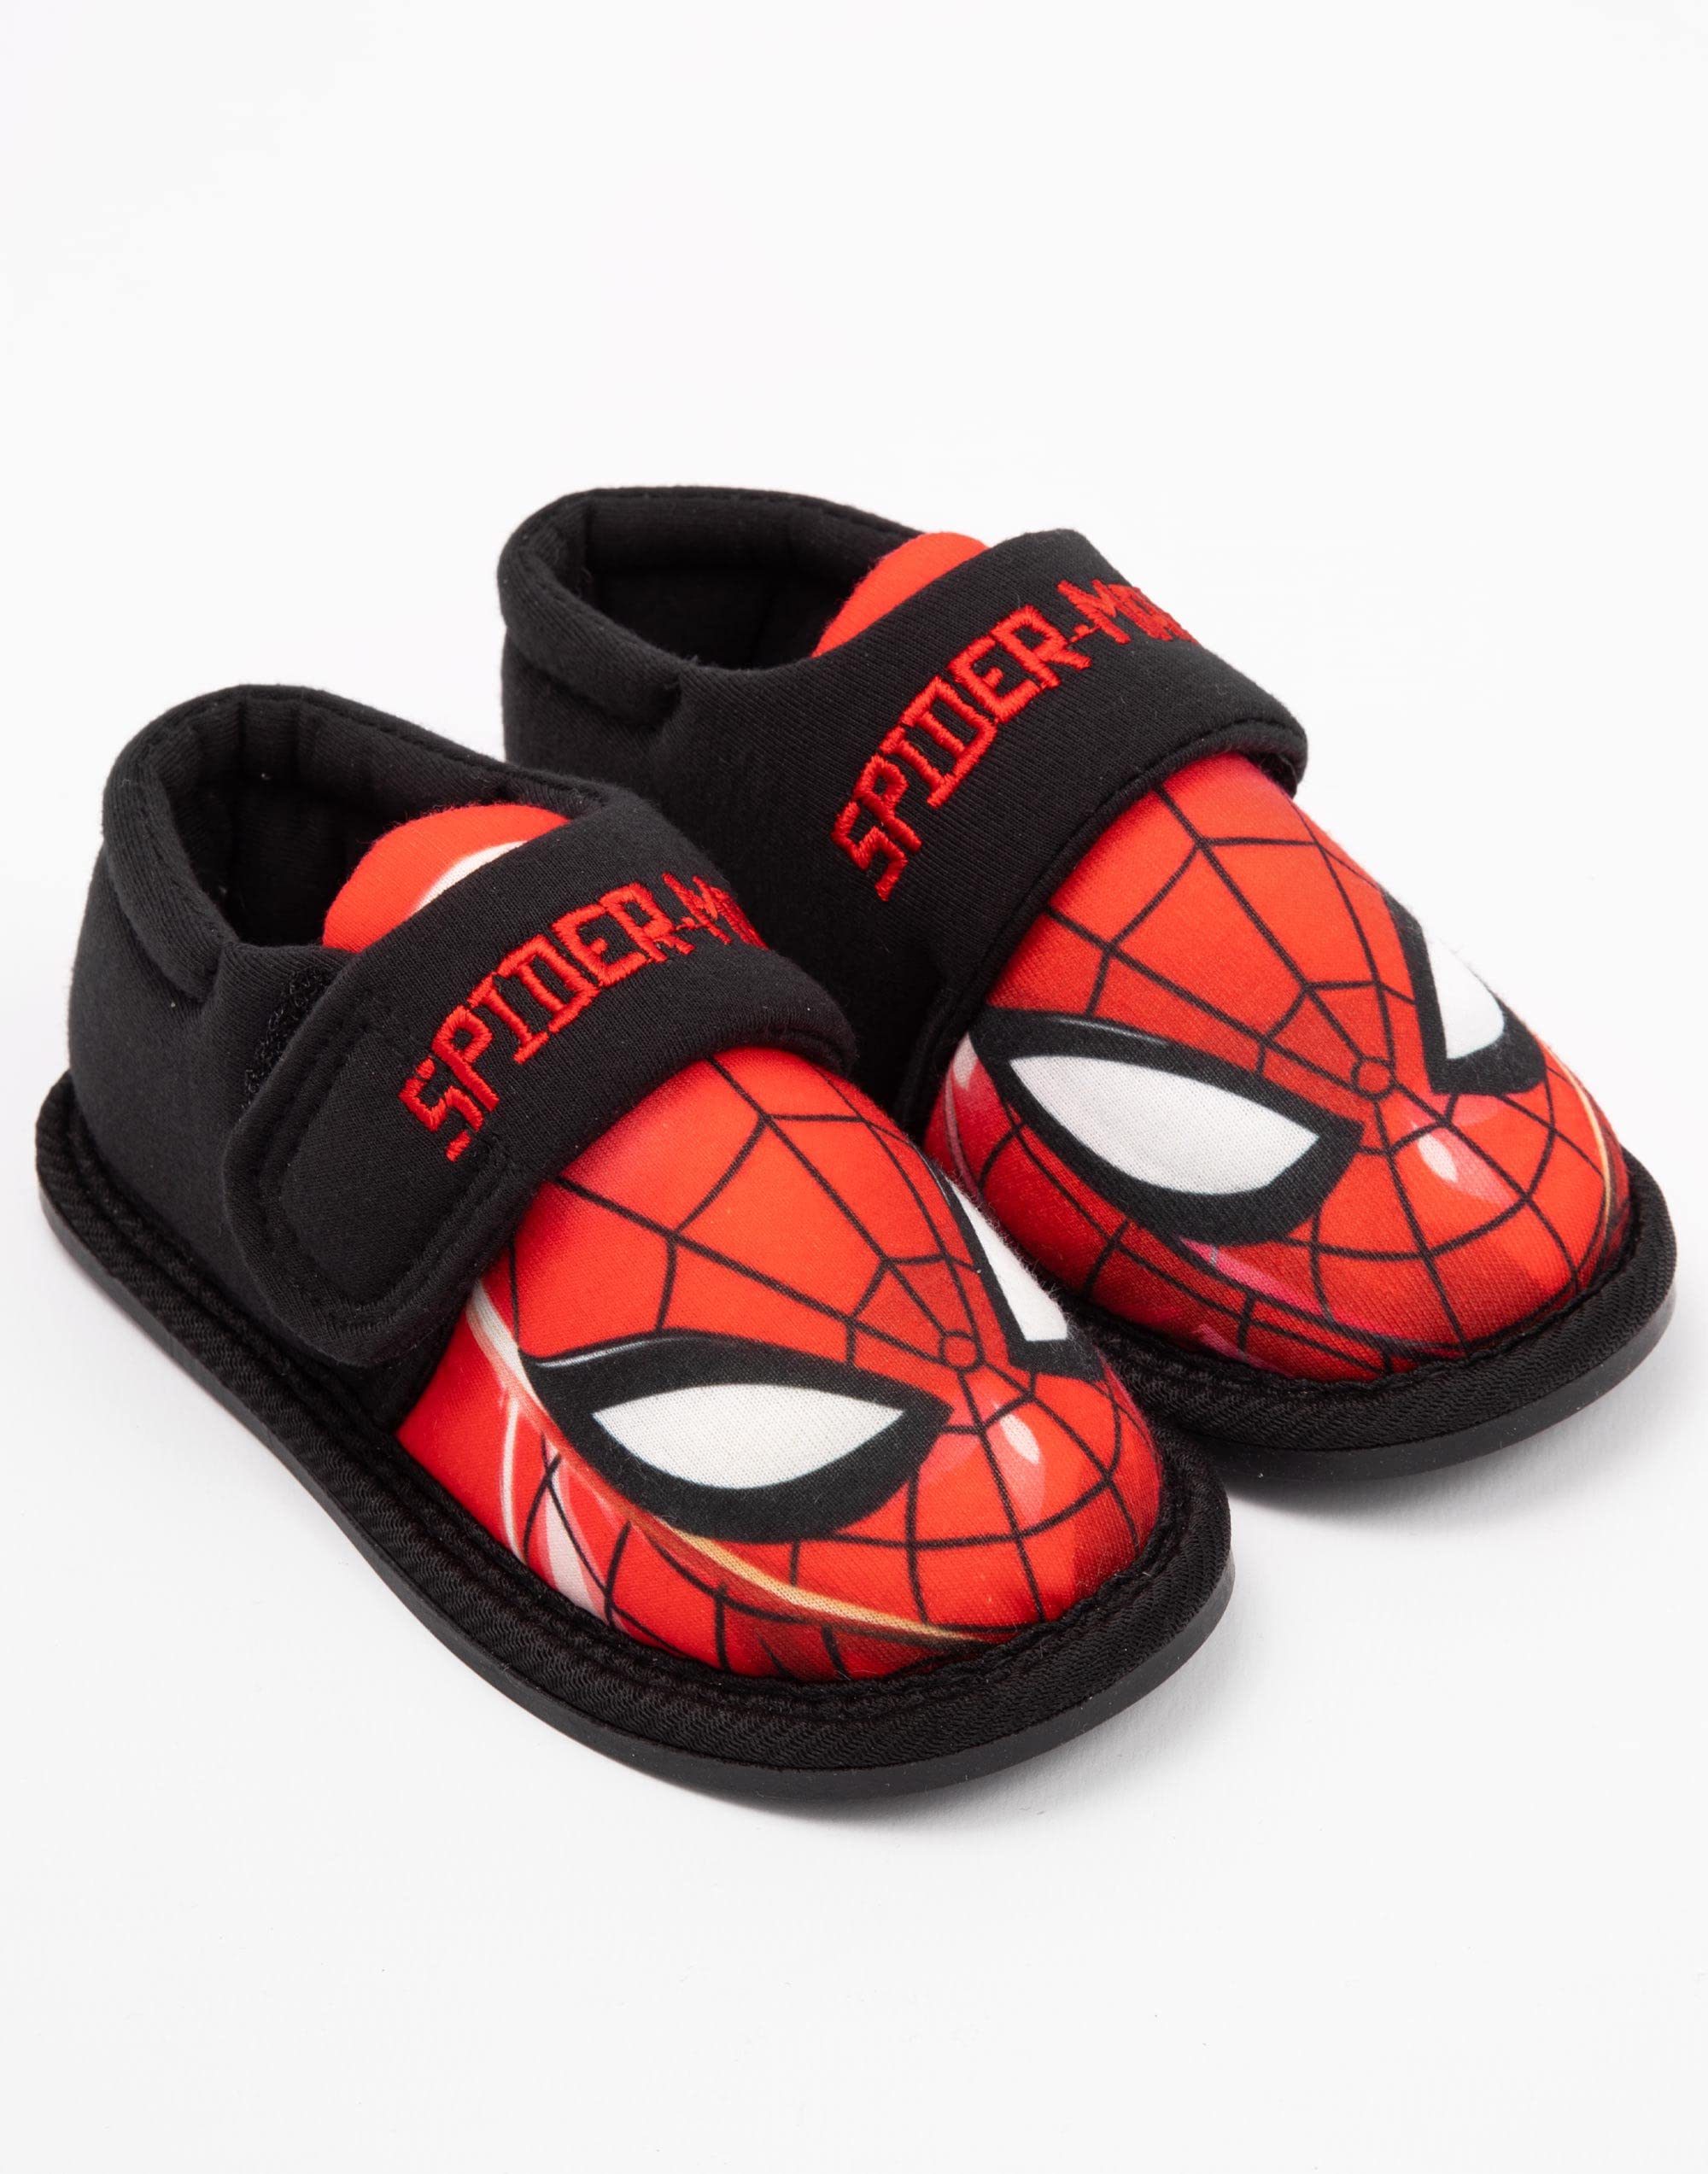 Marvel Spider-Man Slippers Boys Kids Superhero House Shoes Loafers